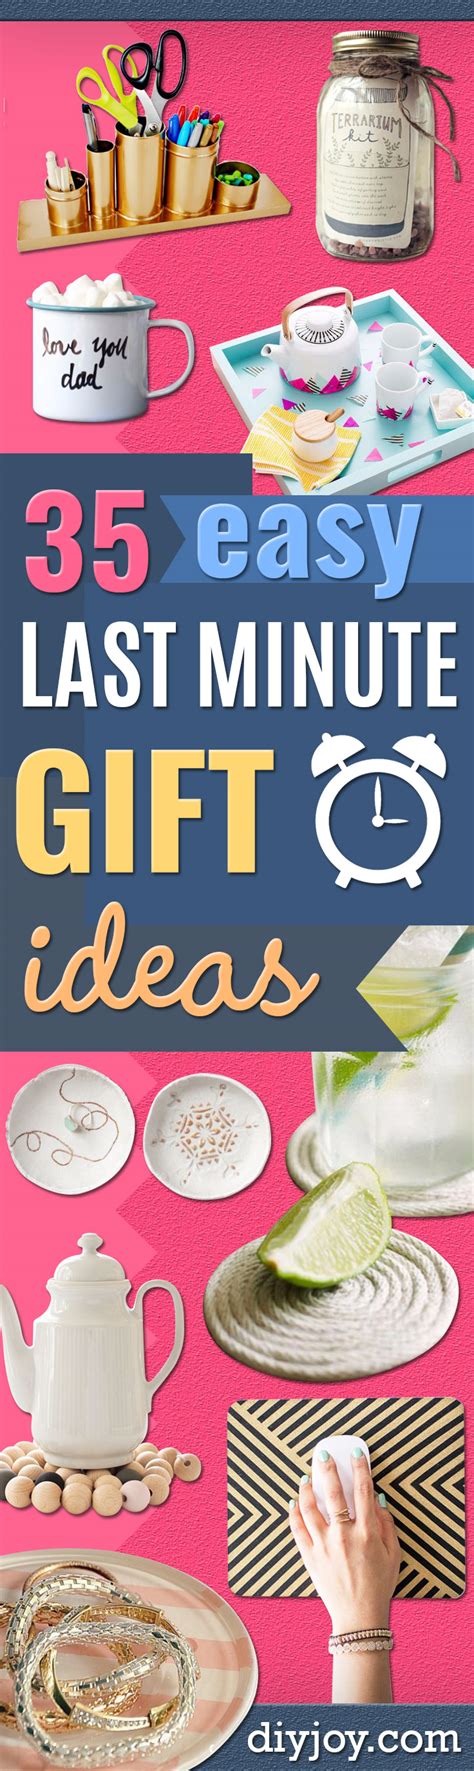 Here are some very interesting suggestions about last minute homemade birthday gifts for dad : Last Minute Homemade Christmas Gift Ideas For Dad - Home ...